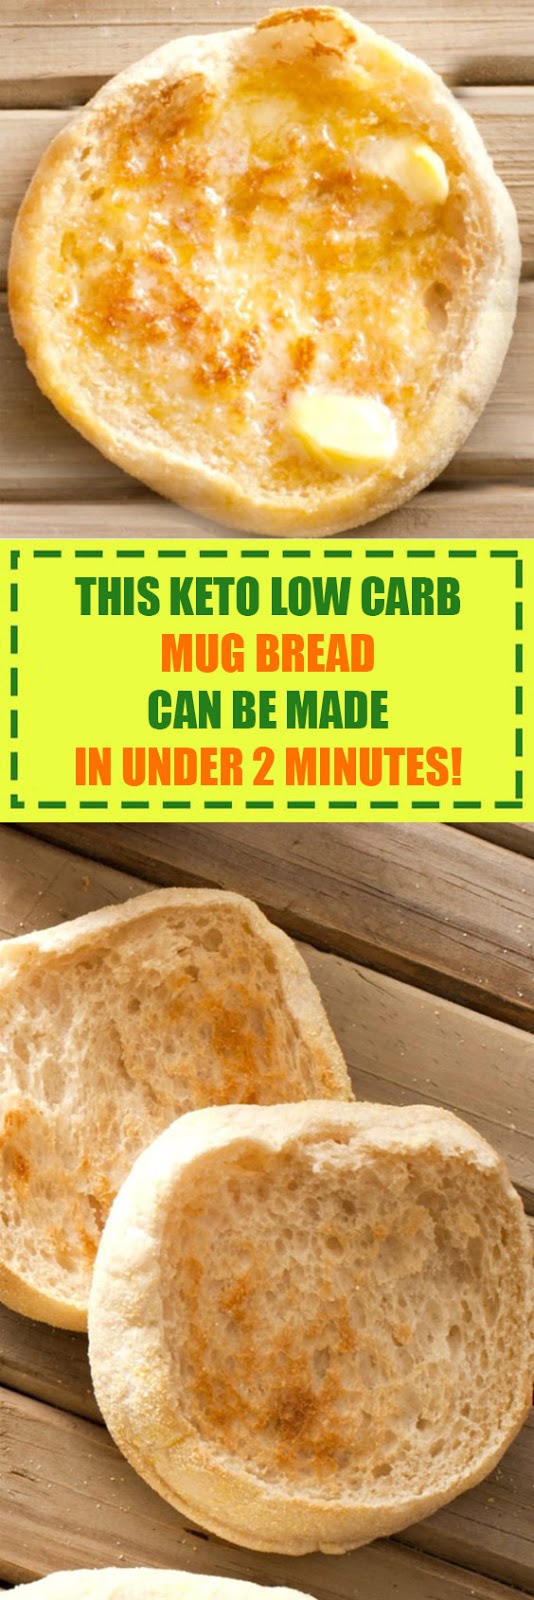 This Keto Low Carb Mug Bread Can Be Made in Under 2 Minutes!